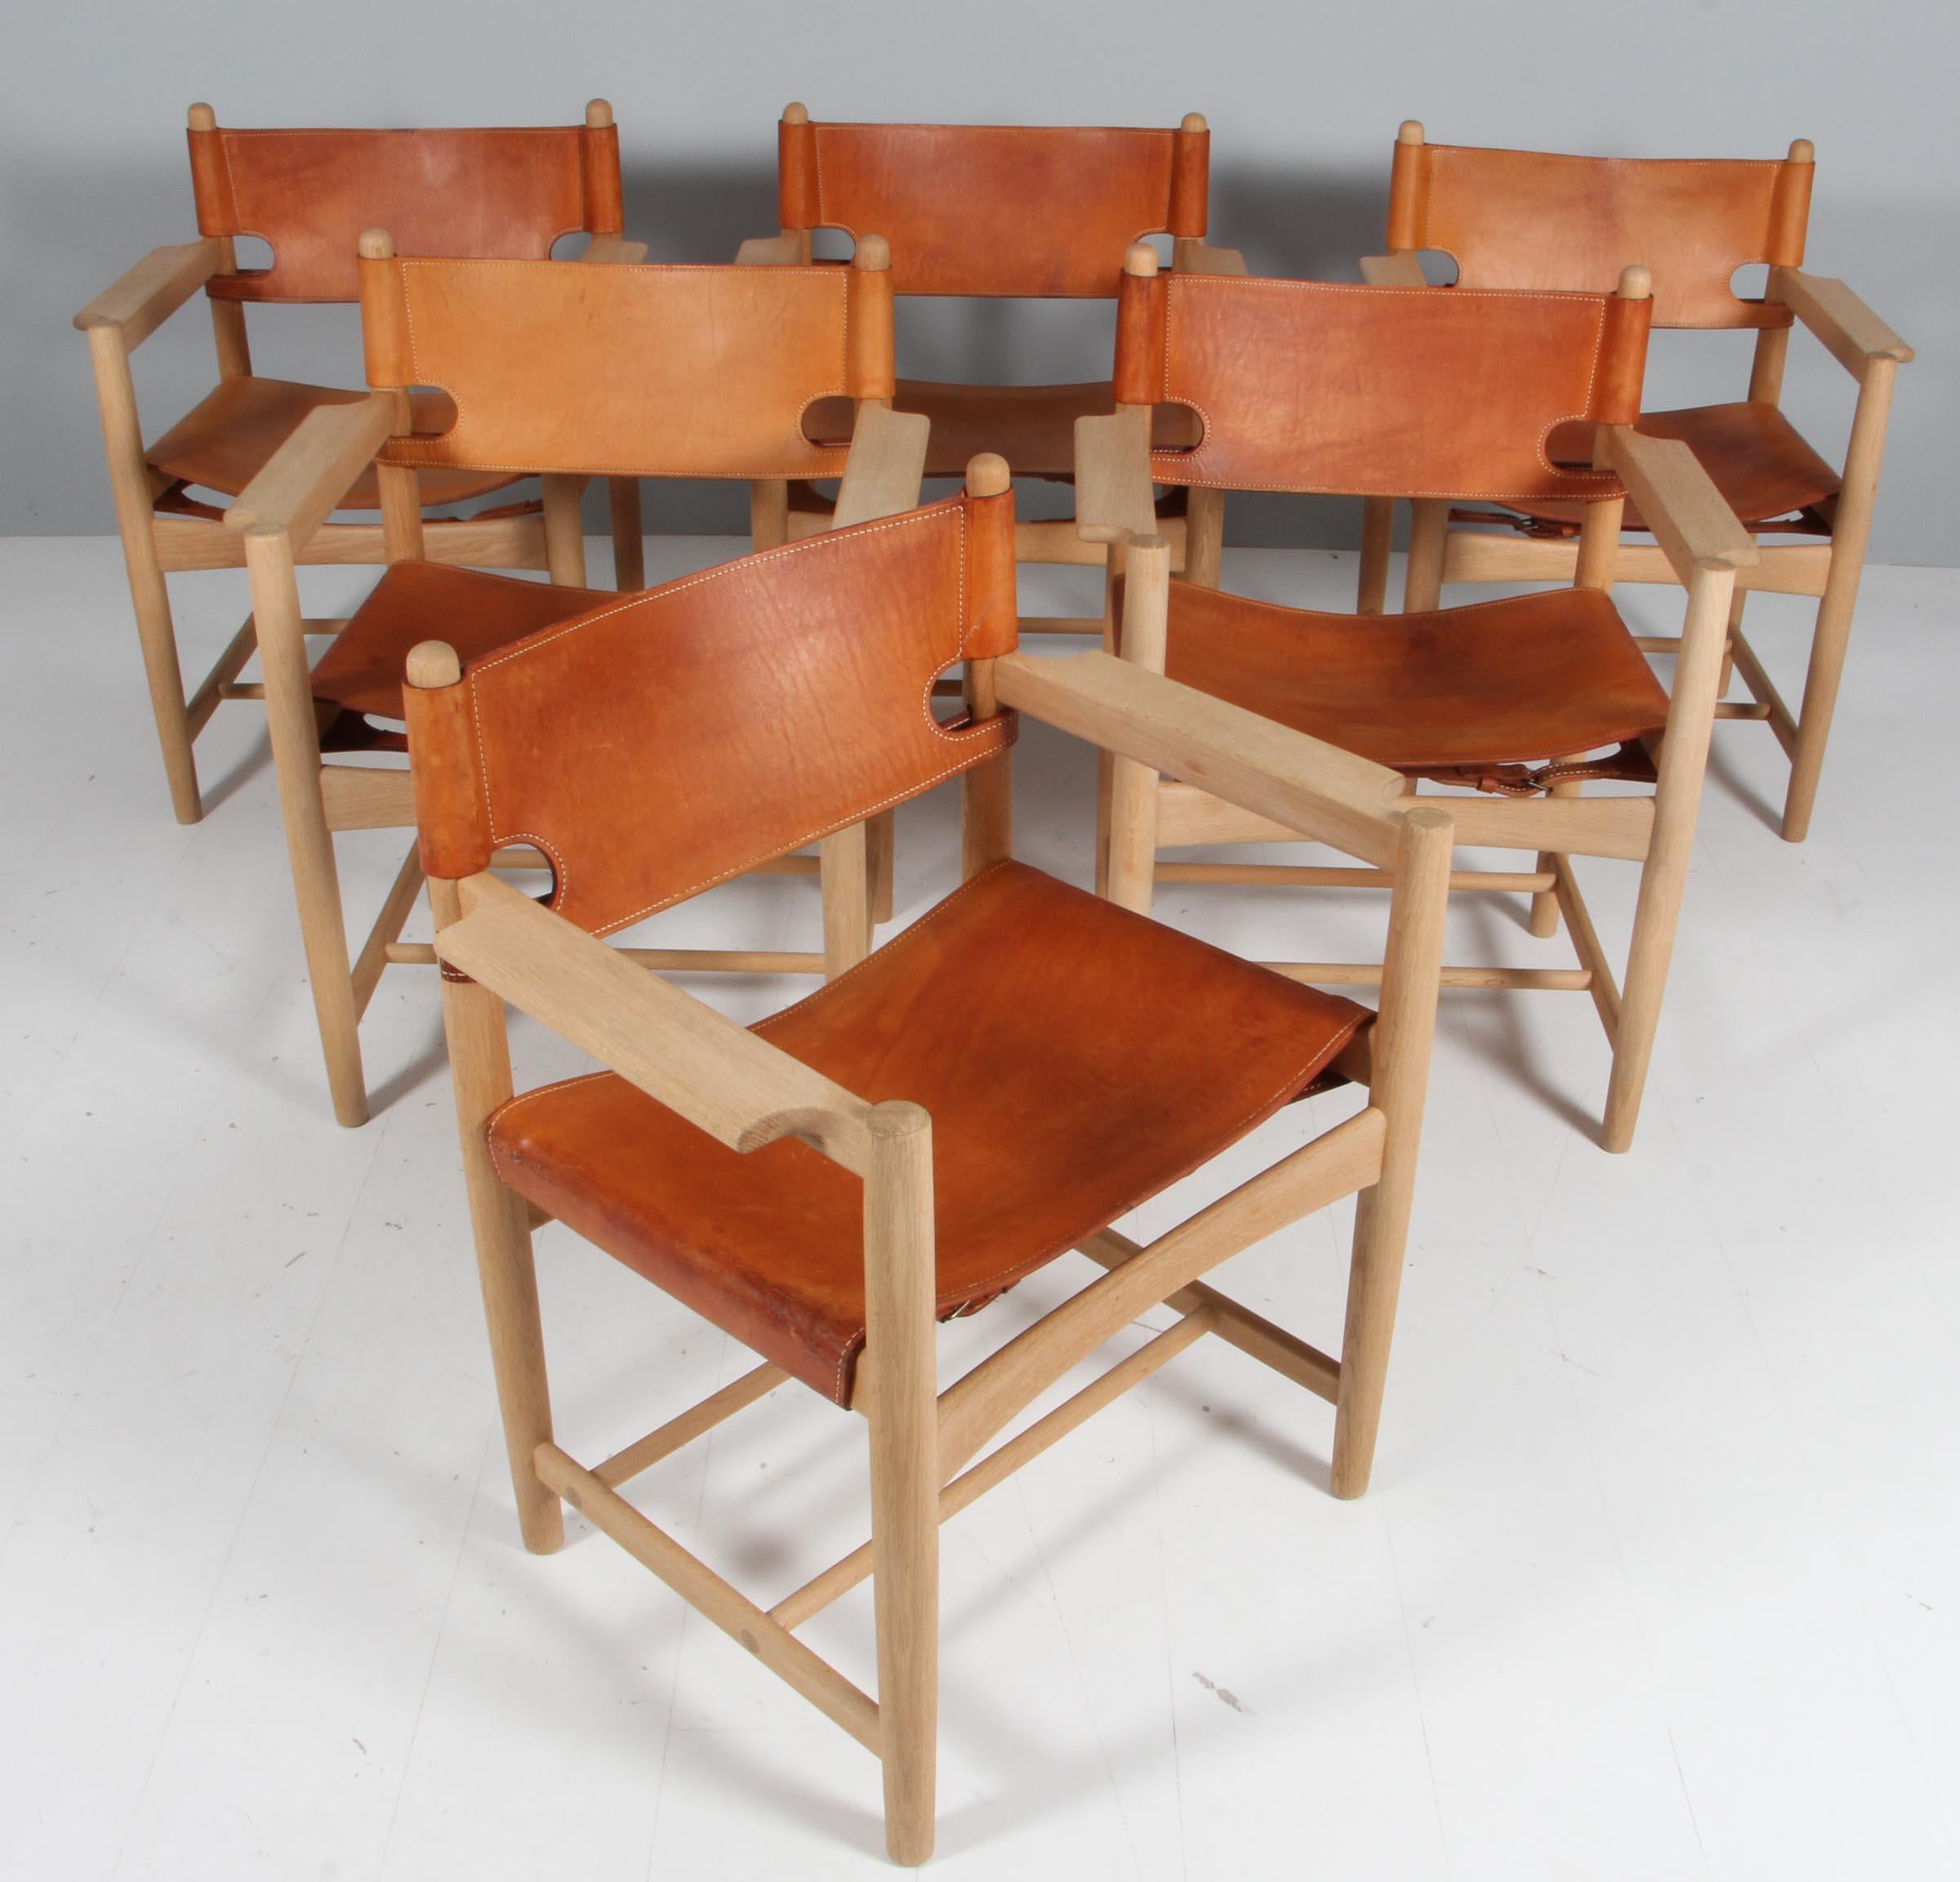 Børge Mogensen for Fredericia Stolefabrik, set of 6 armchairs model 3238, in oak and leather, Denmark, 1964.

Set of six armchairs in solid oak. These chairs remind of the classical foldable 'director-chairs', yet this design by Danish designer